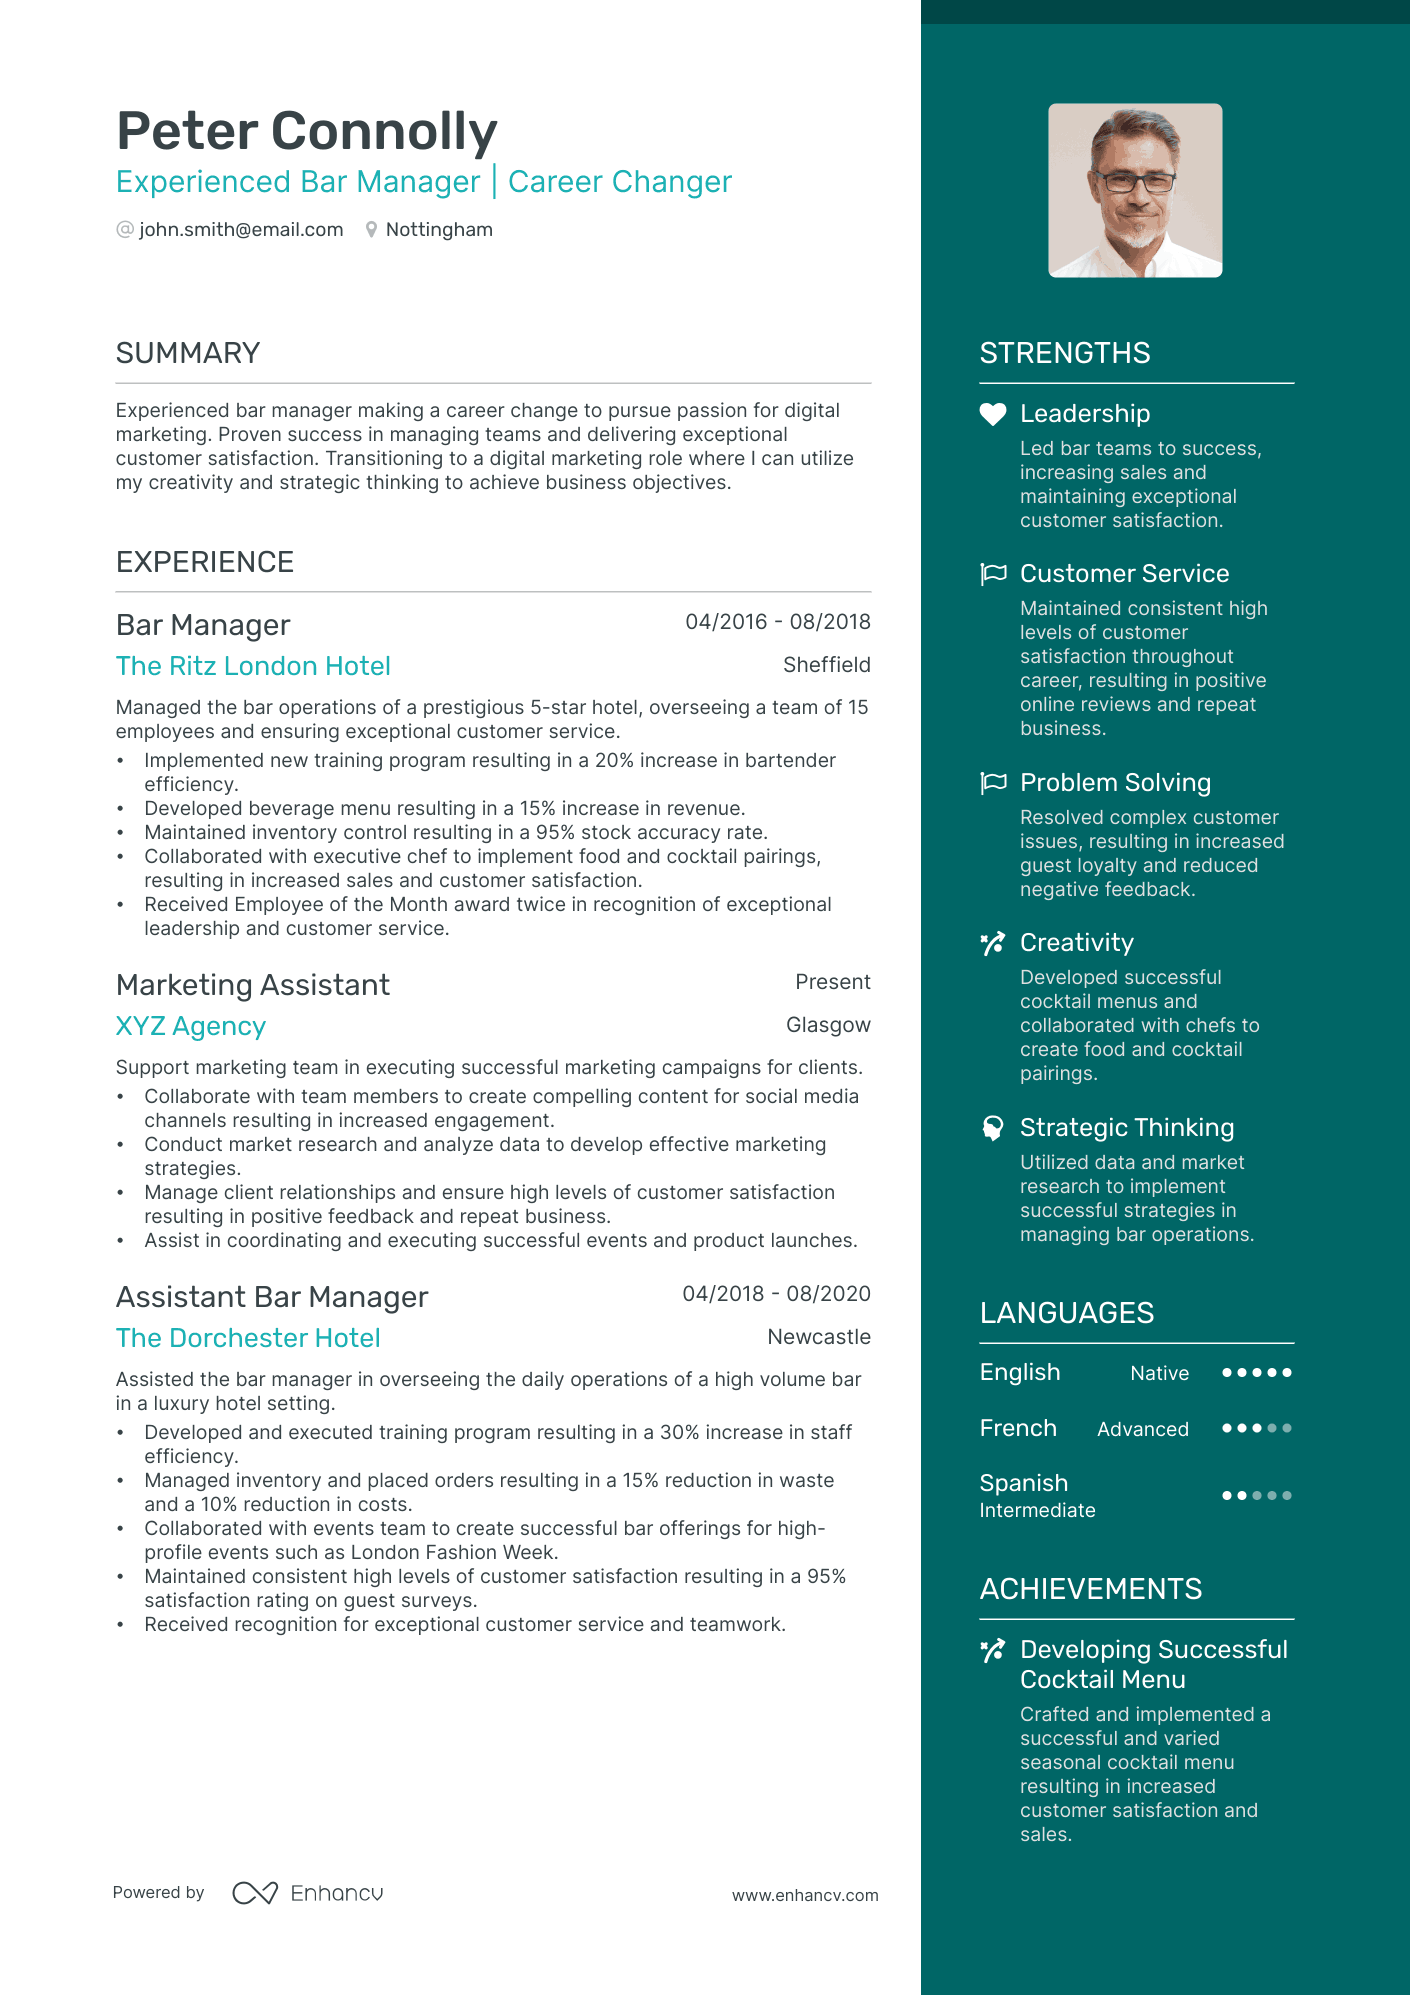 Experienced Bar Manager | Career Changer CV example